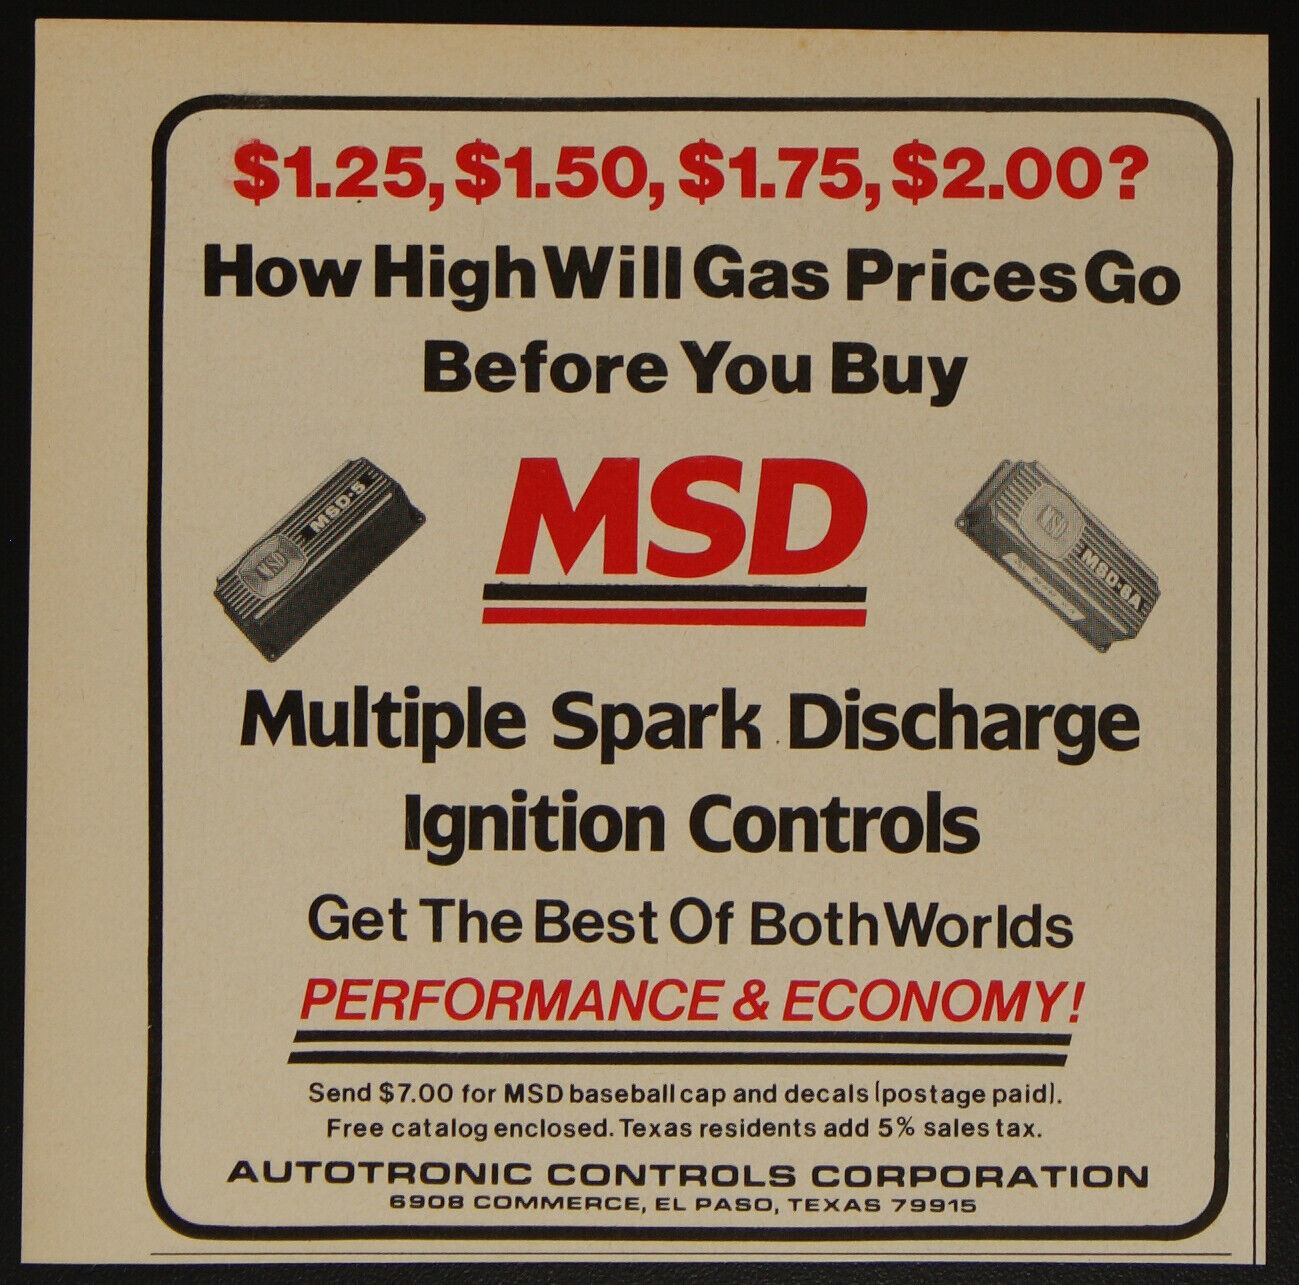 MSD Multiple Spark Discharge Auto Electronic Ignition Vintage Print Ad 1980